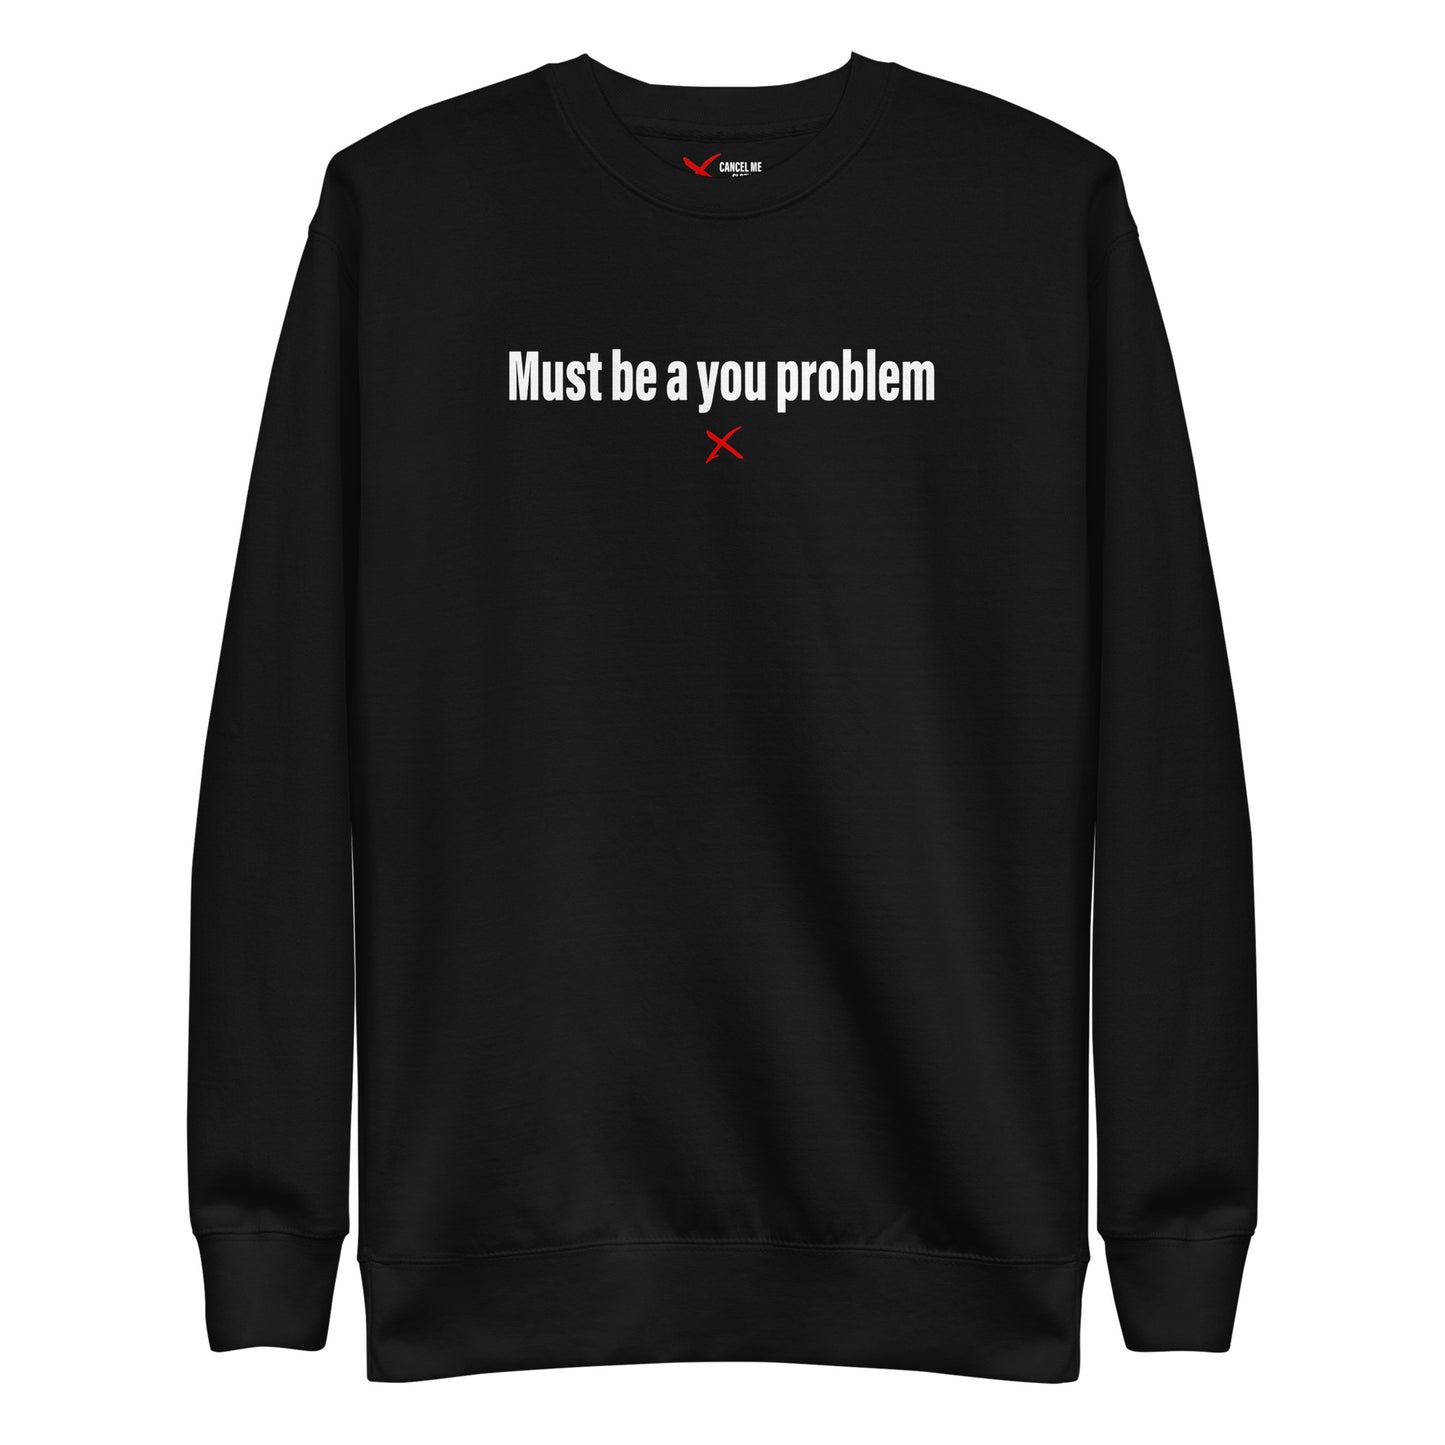 Must be a you problem - Sweatshirt